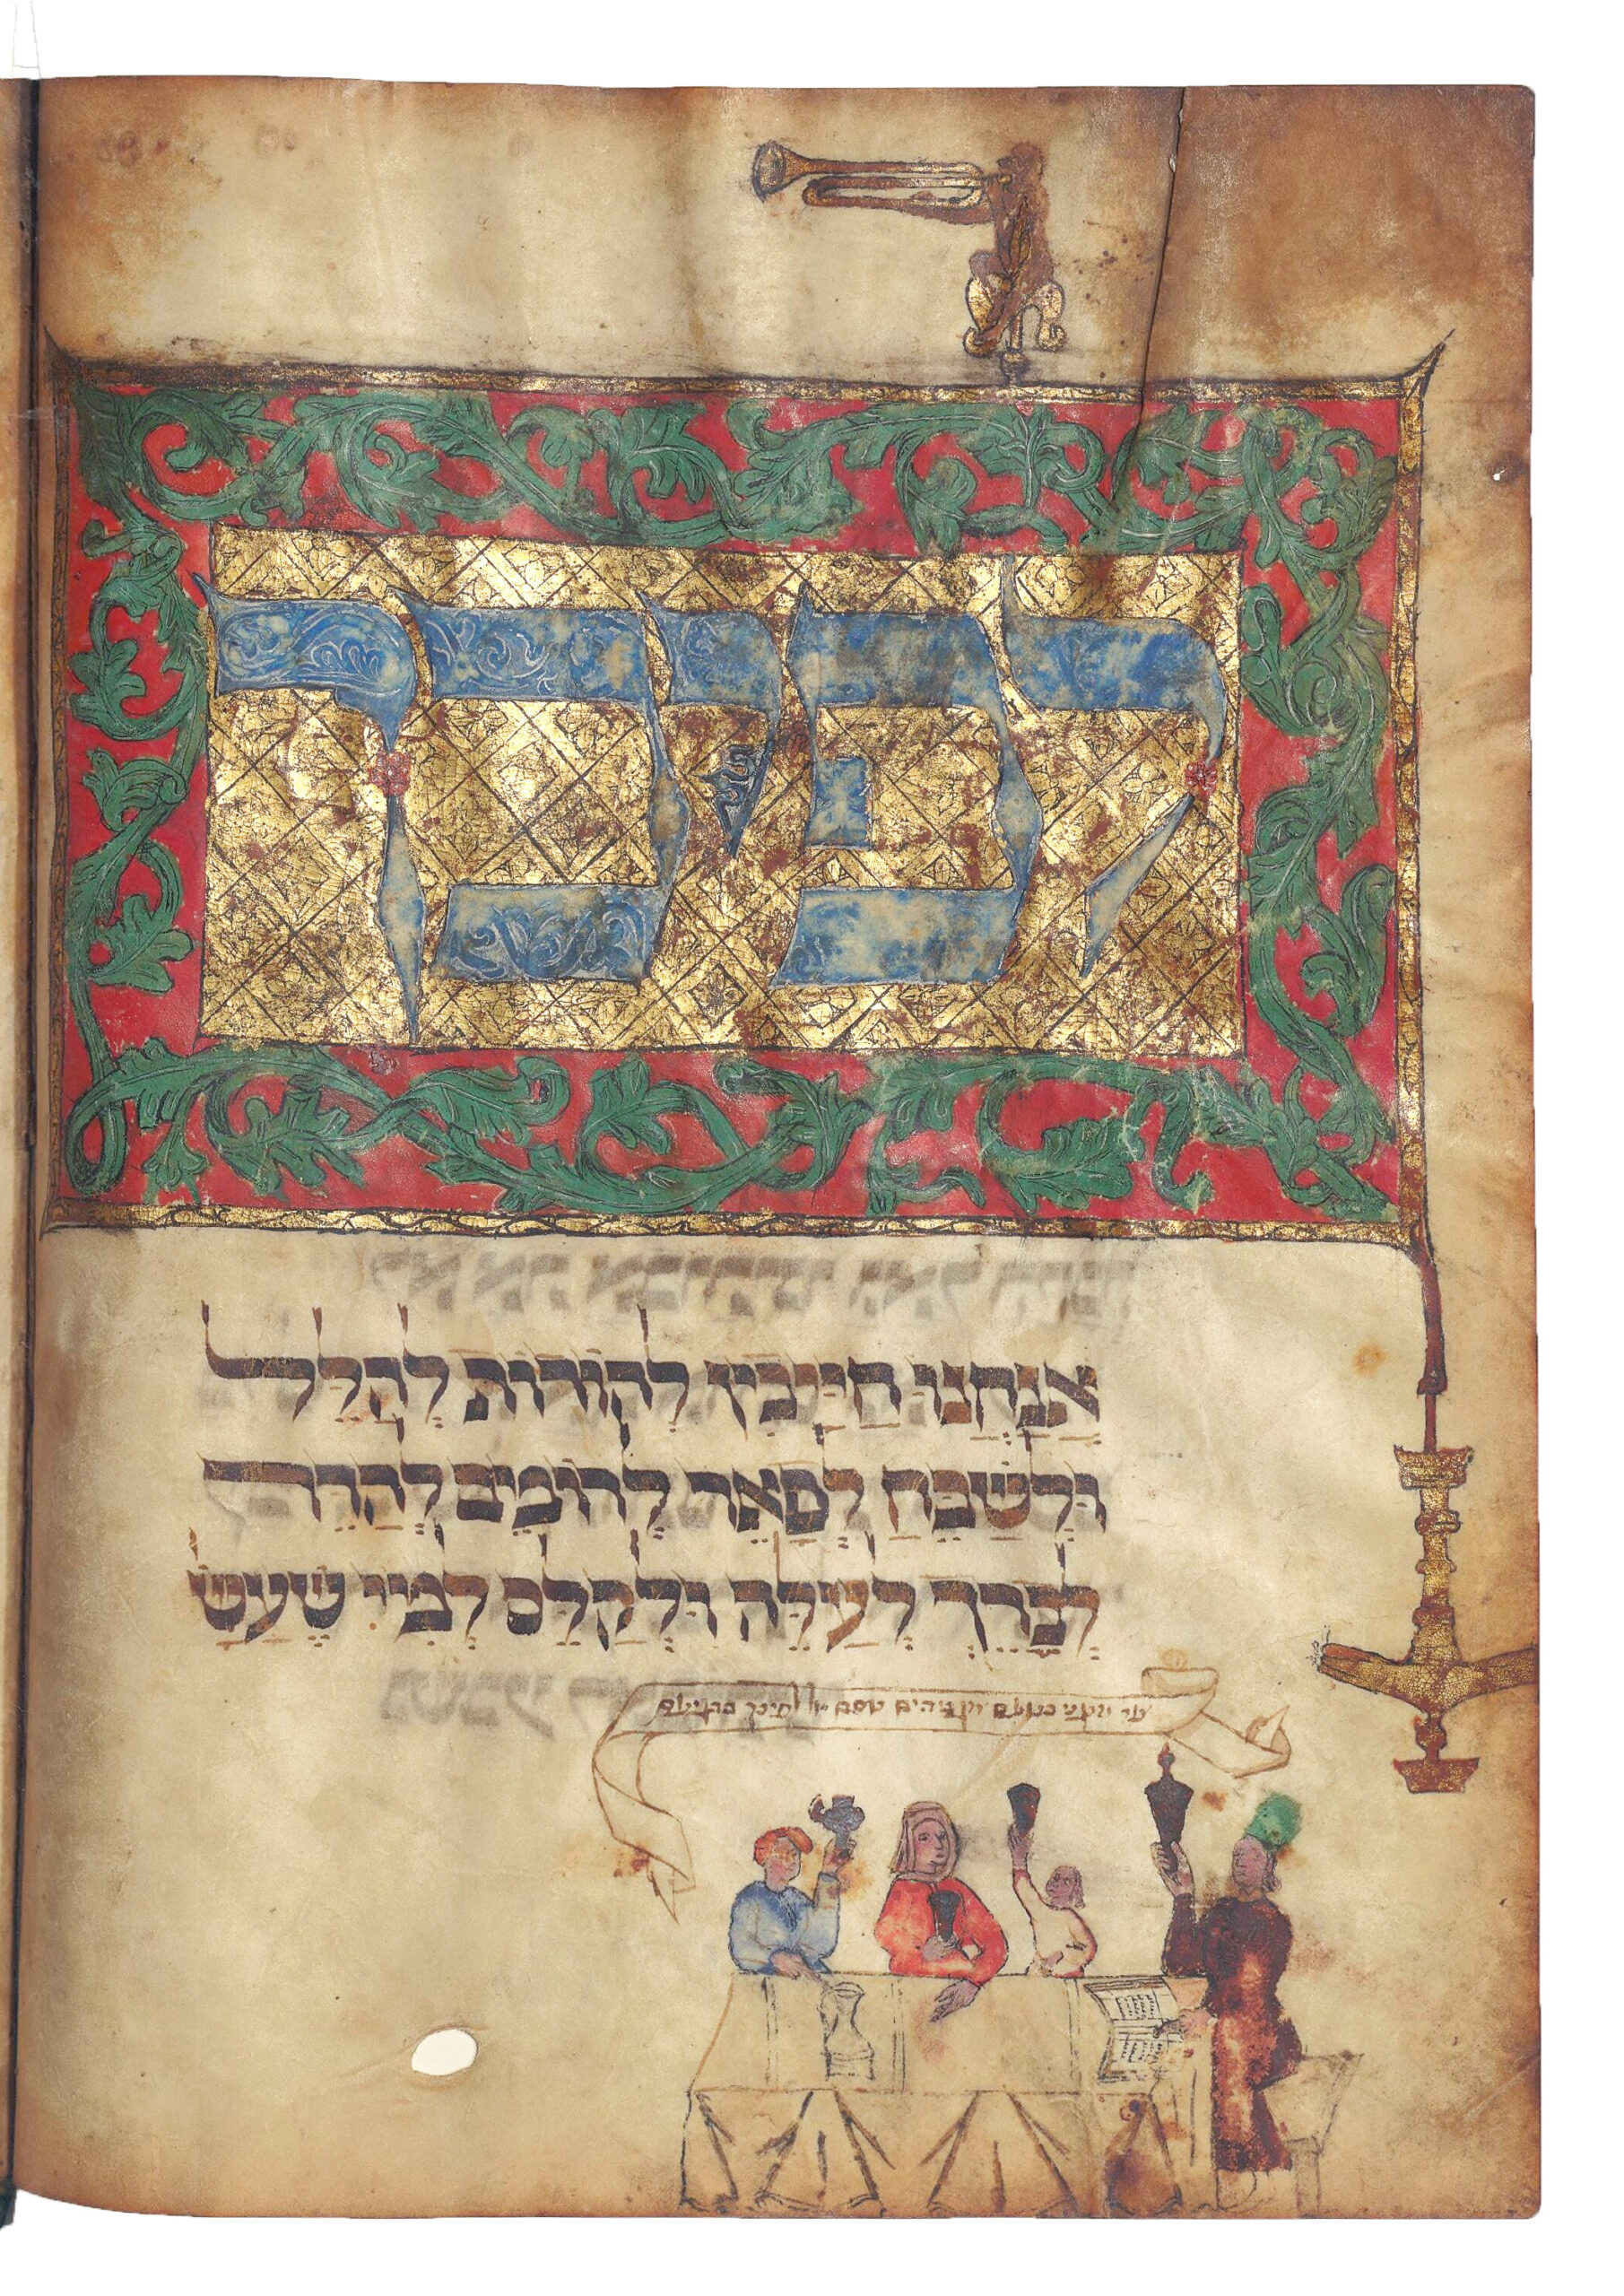 Smarthistory – The “Hileq and Bileq” Haggadah